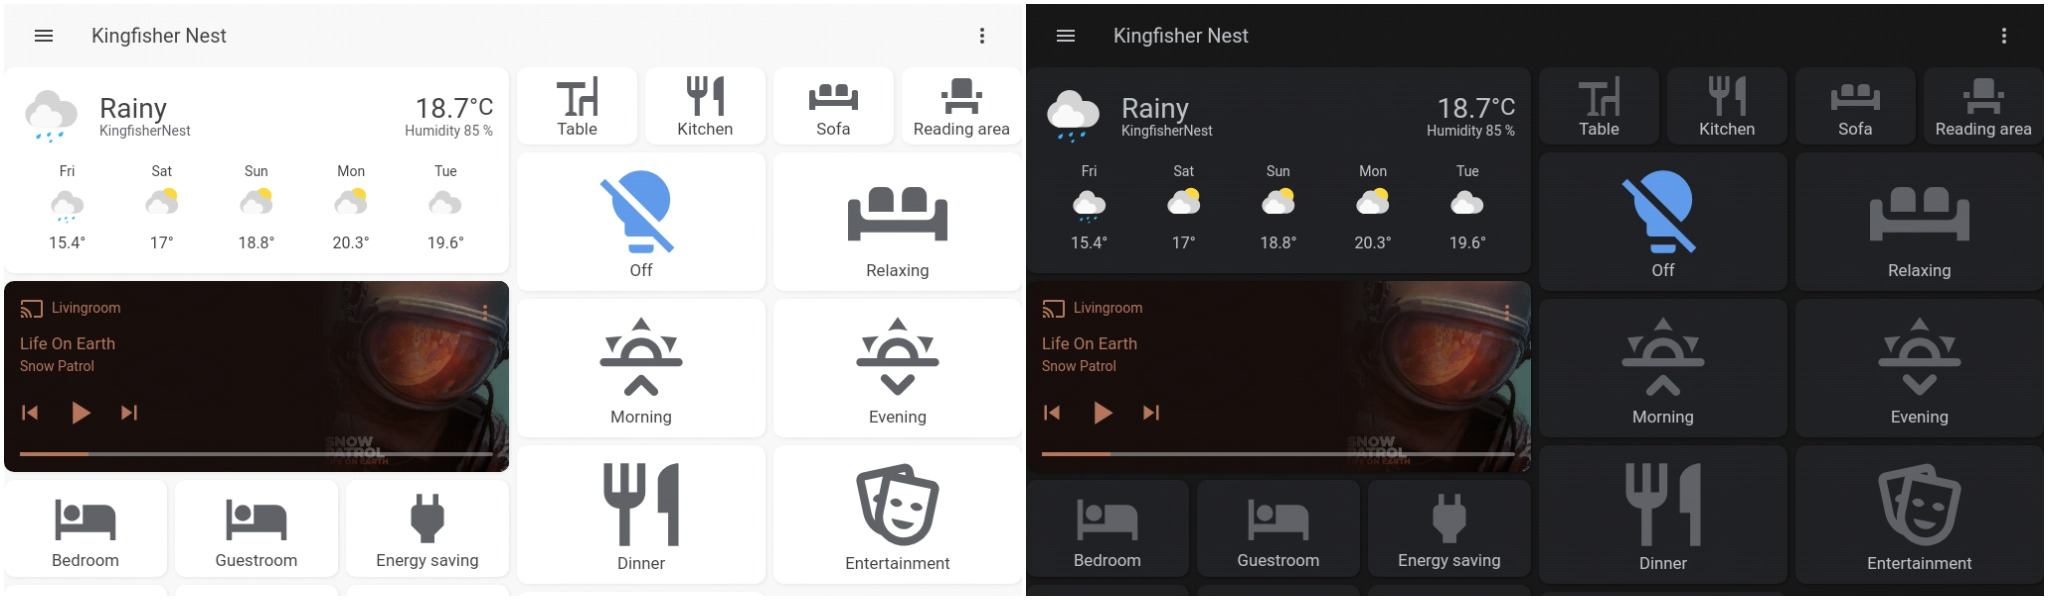 With a single automation, we can setup an easy but effecive auto dark mode for Home Assistant. Left is an example interface during the day, right is the interface in the evening.